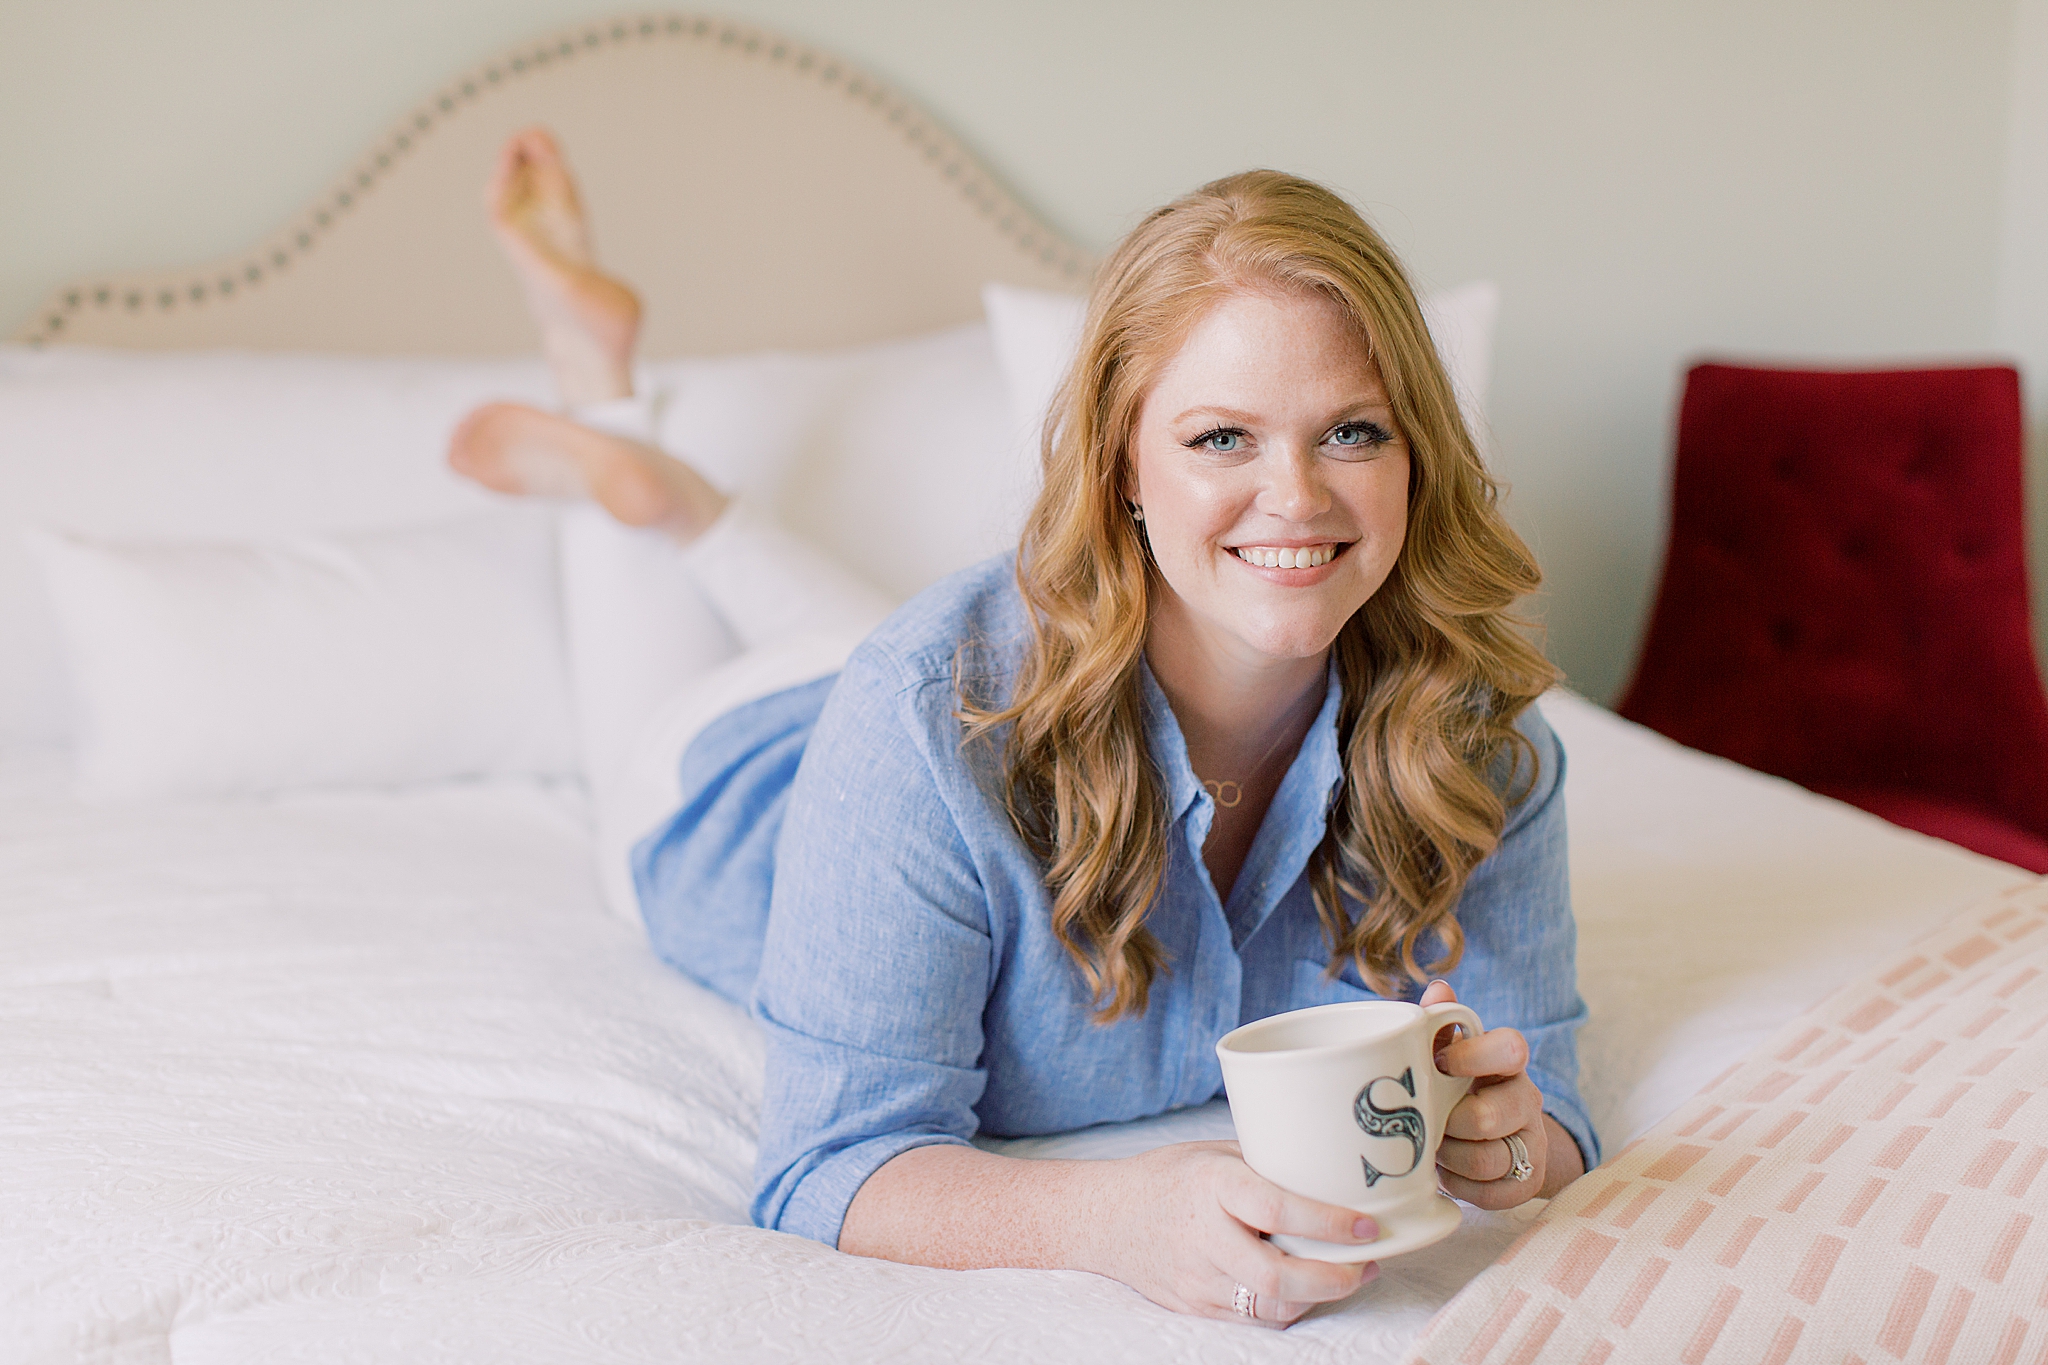 woman lays on bed with feet in the air during branding photos